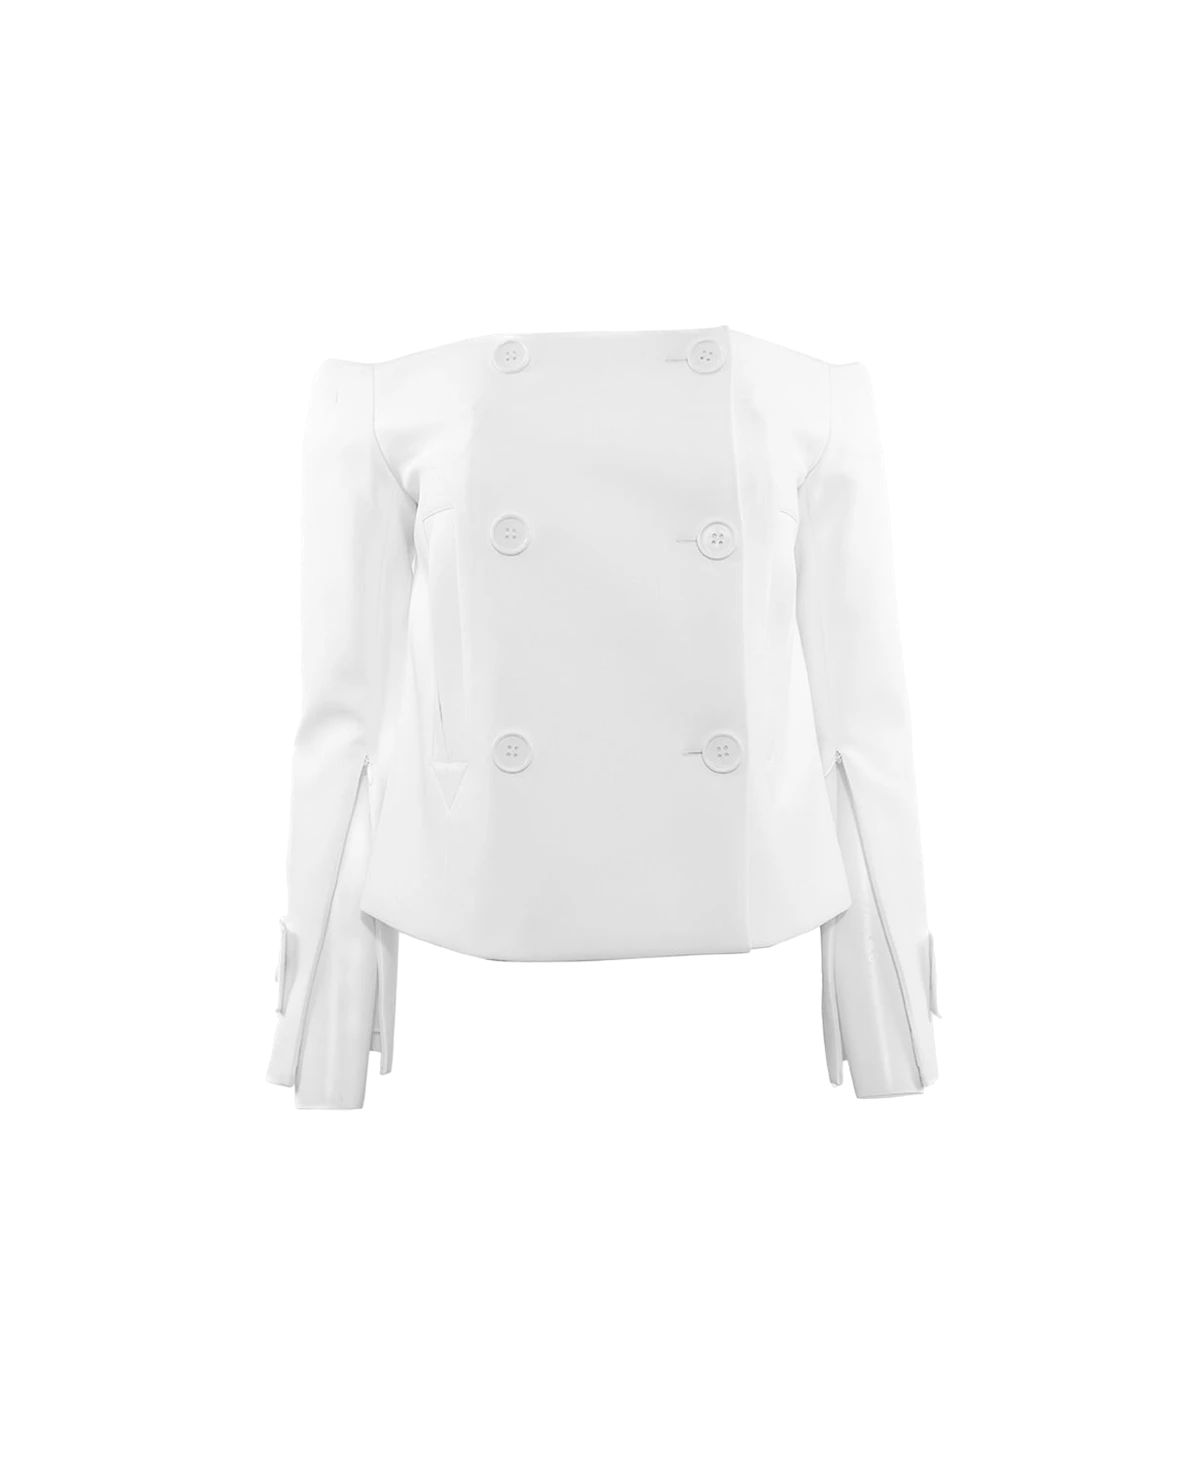 Shop Daphne Off-Shoulder Jacket from THEO the label at Seezona | Seezona | Seezona